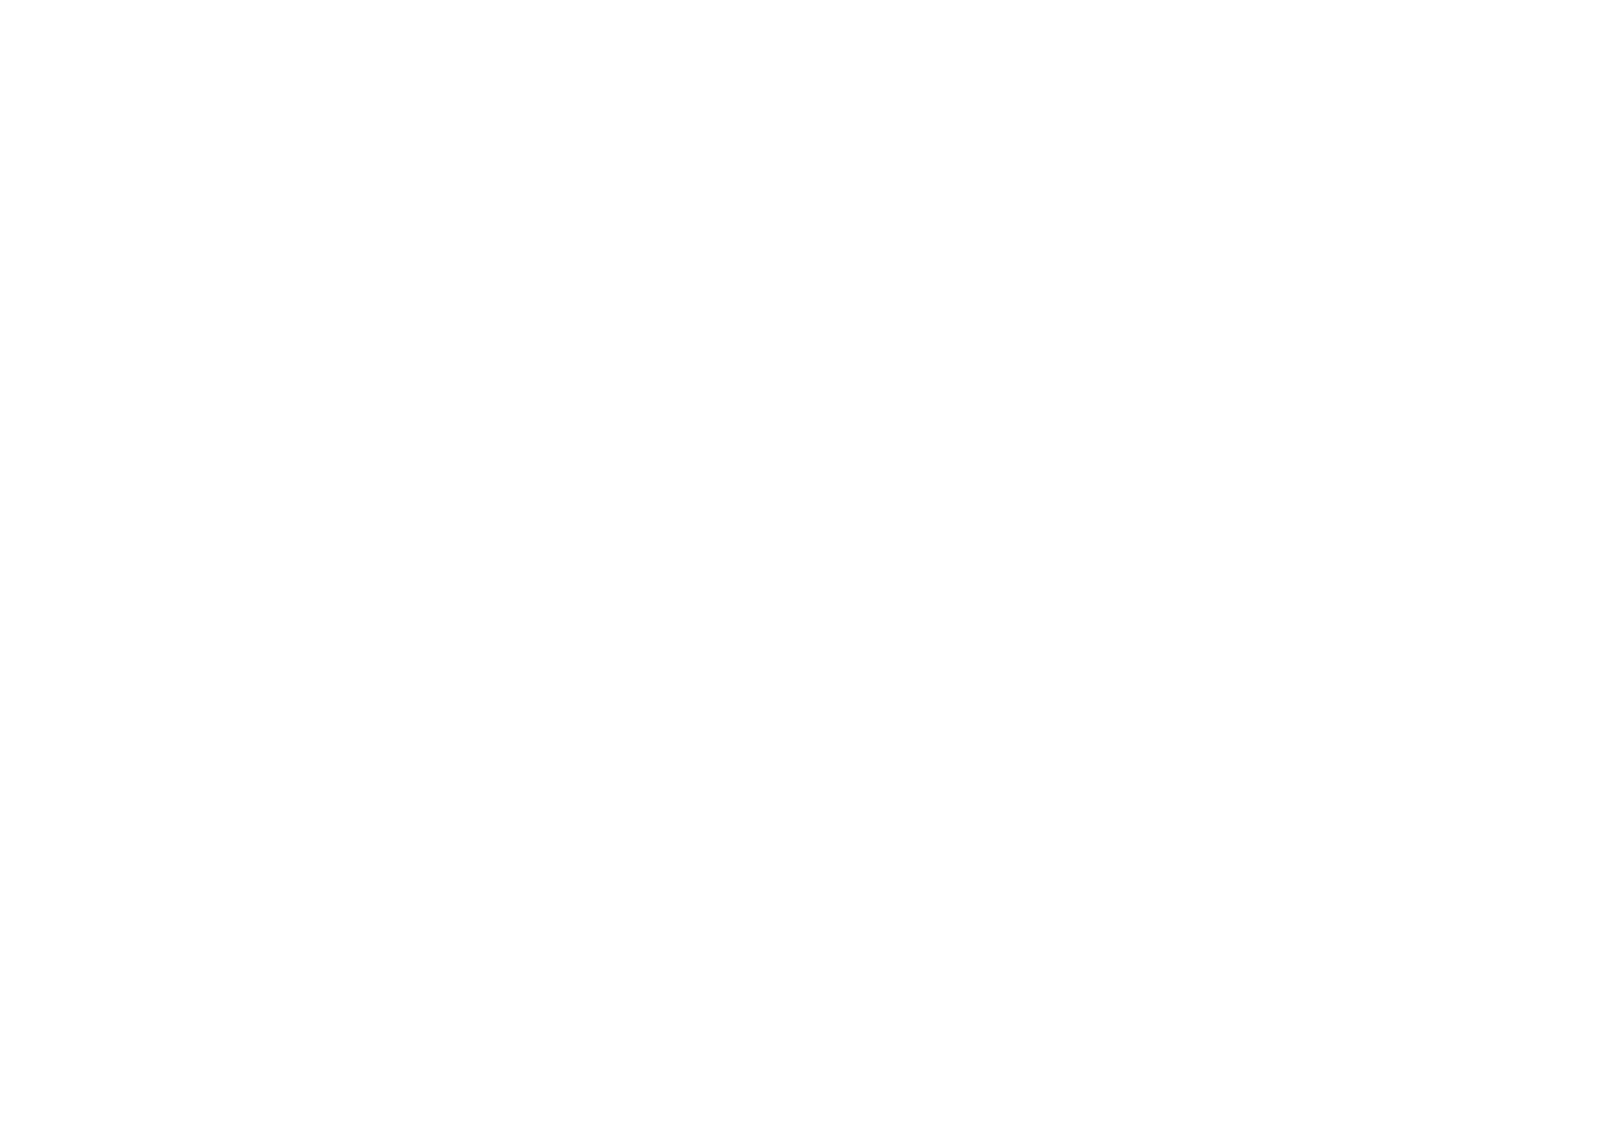 Lil Dabble's Bangers and Glass